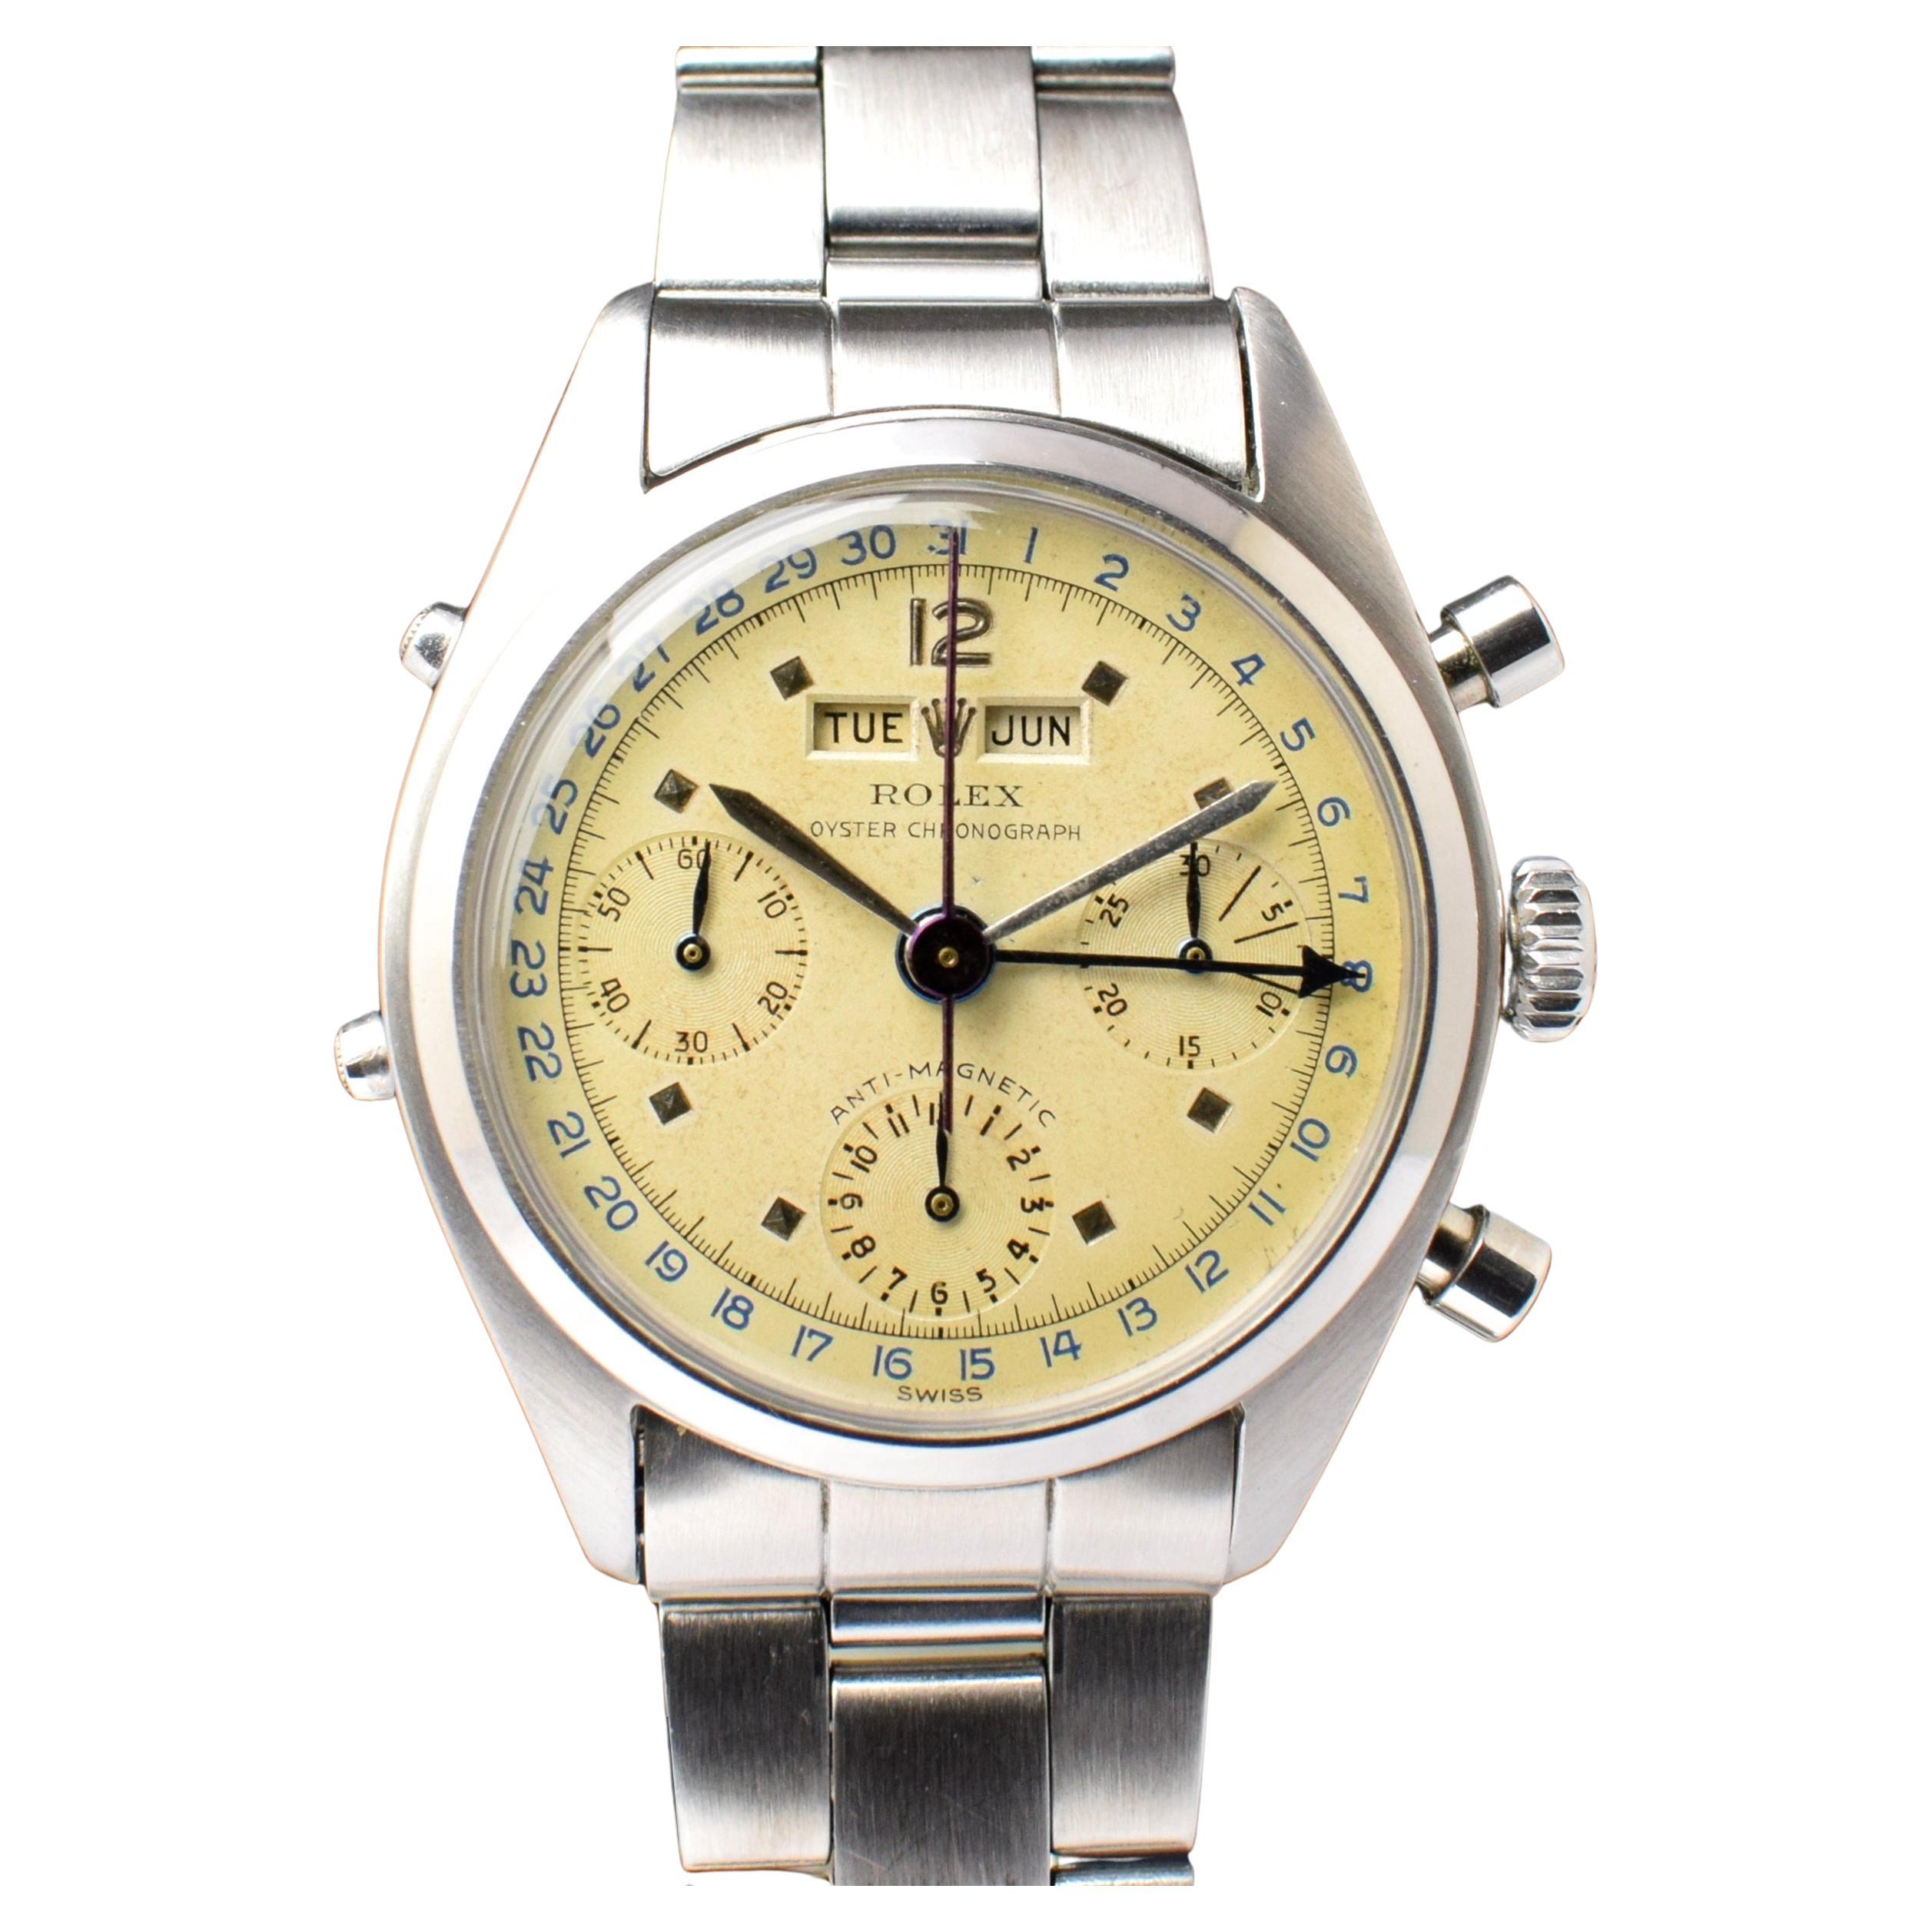 Rolex Killy Triple Date Calendar Chronograph 6036 Steel Manual Wind Watch,  1954 For Sale at 1stDibs